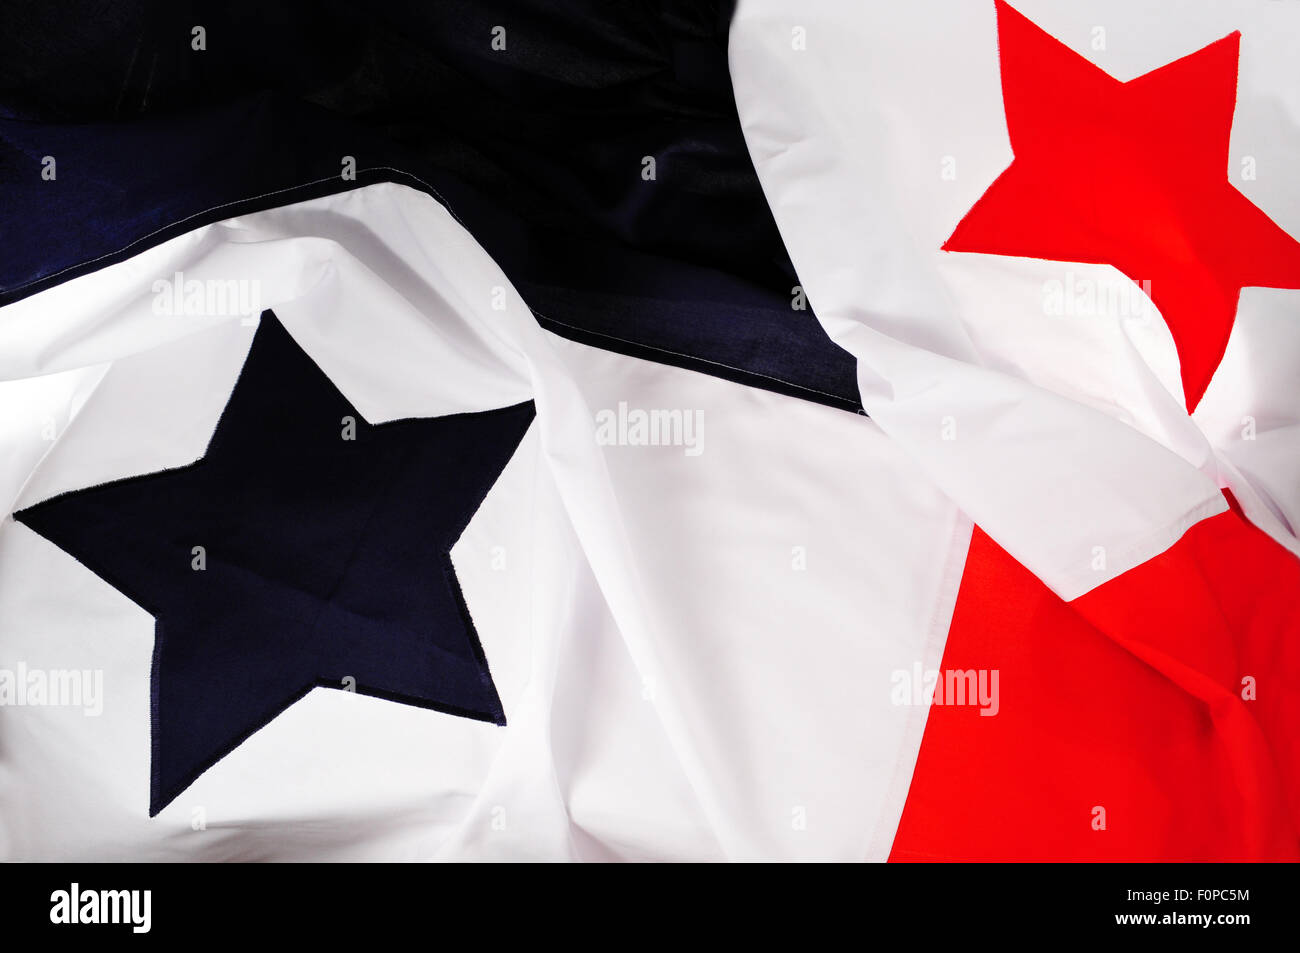 Macro shot of the panamanian flag showing its beautiful colors and stars Stock Photo